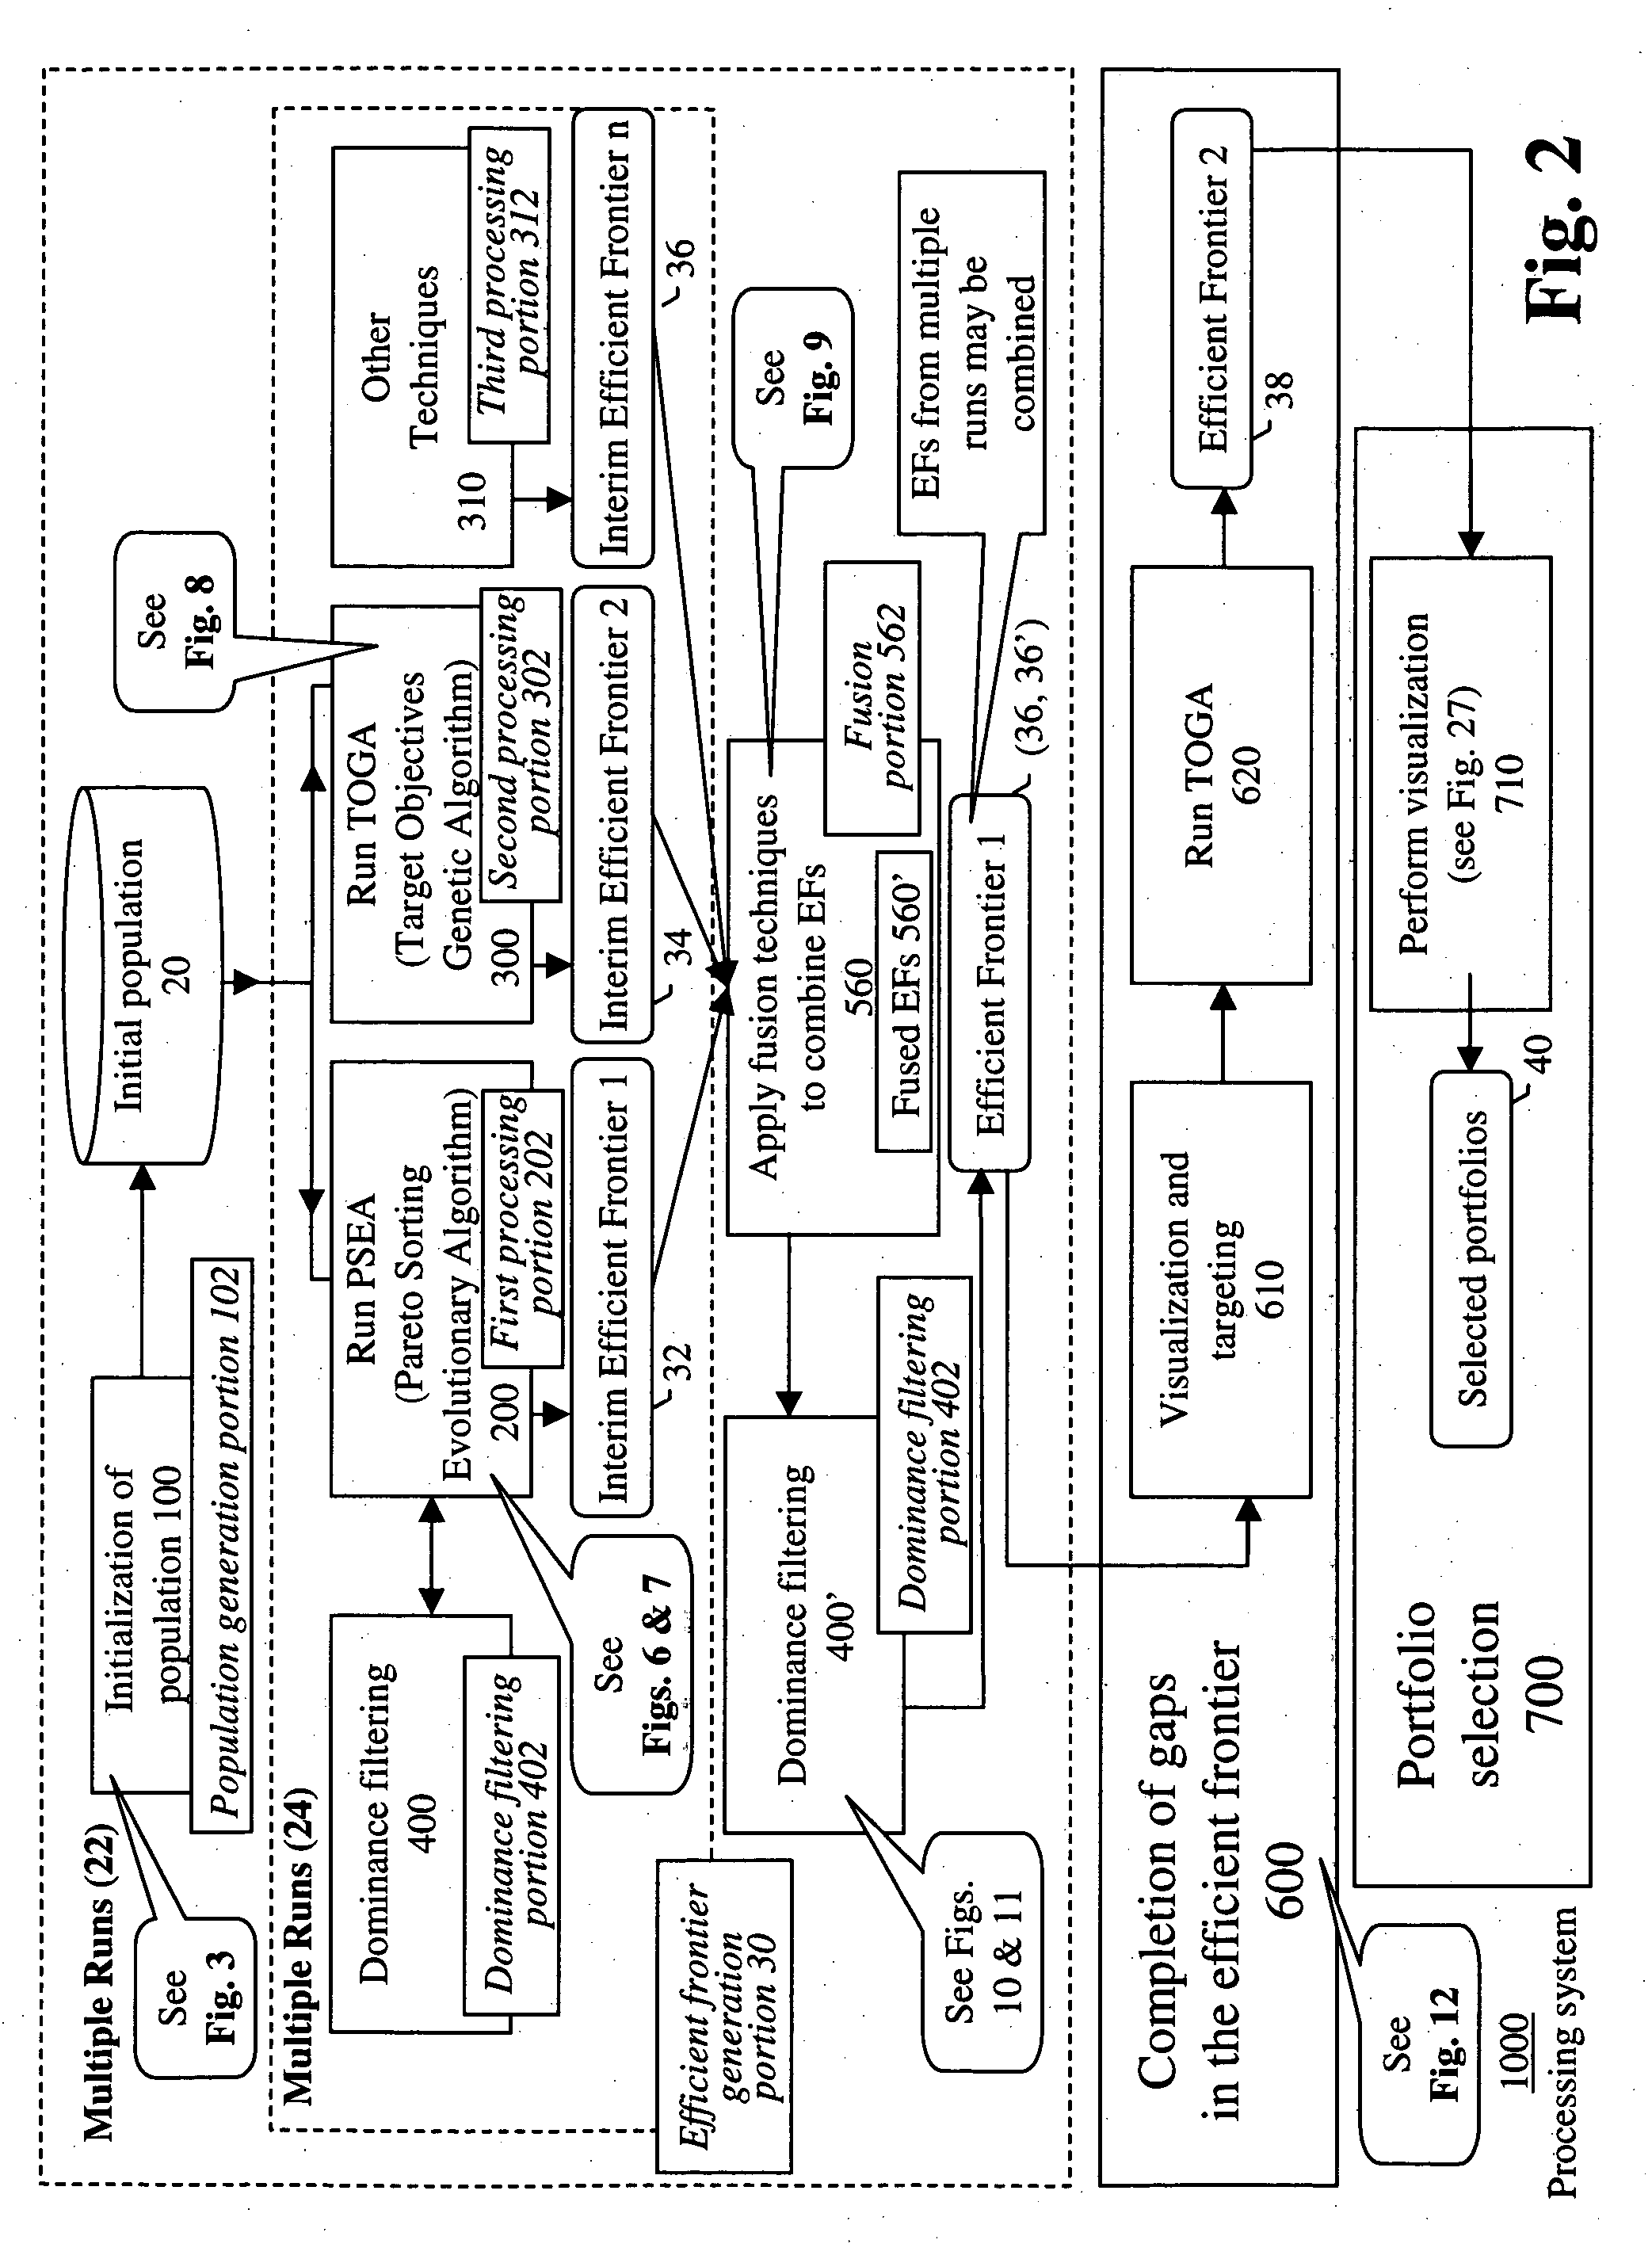 Systems and methods for efficient frontier supplementation in multi-objective portfolio analysis